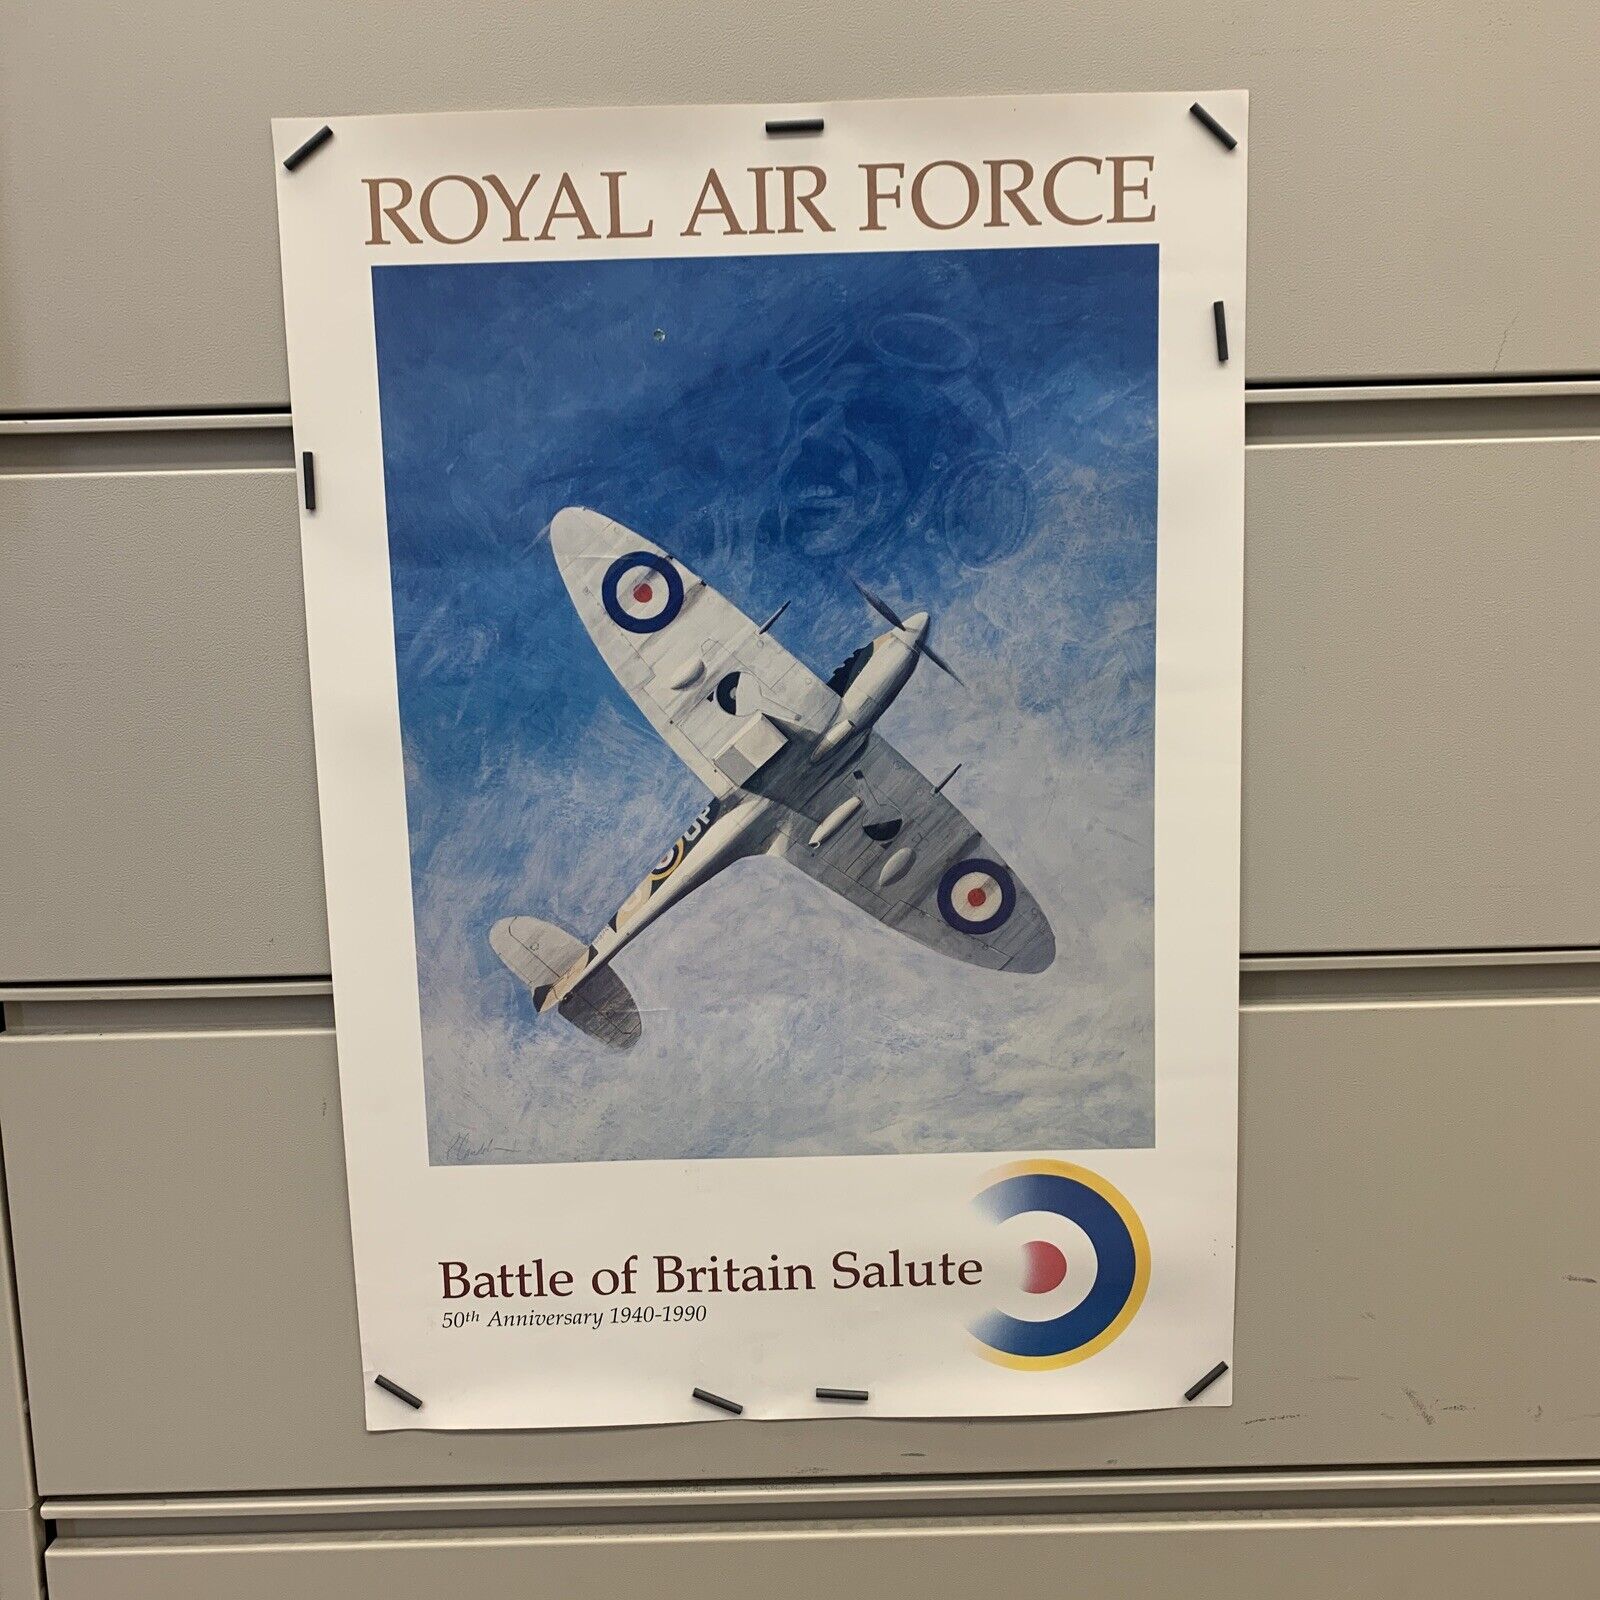 Battle of Britain Salute 50th Anniversary  Royal Air Force Spitfire Poster 1990